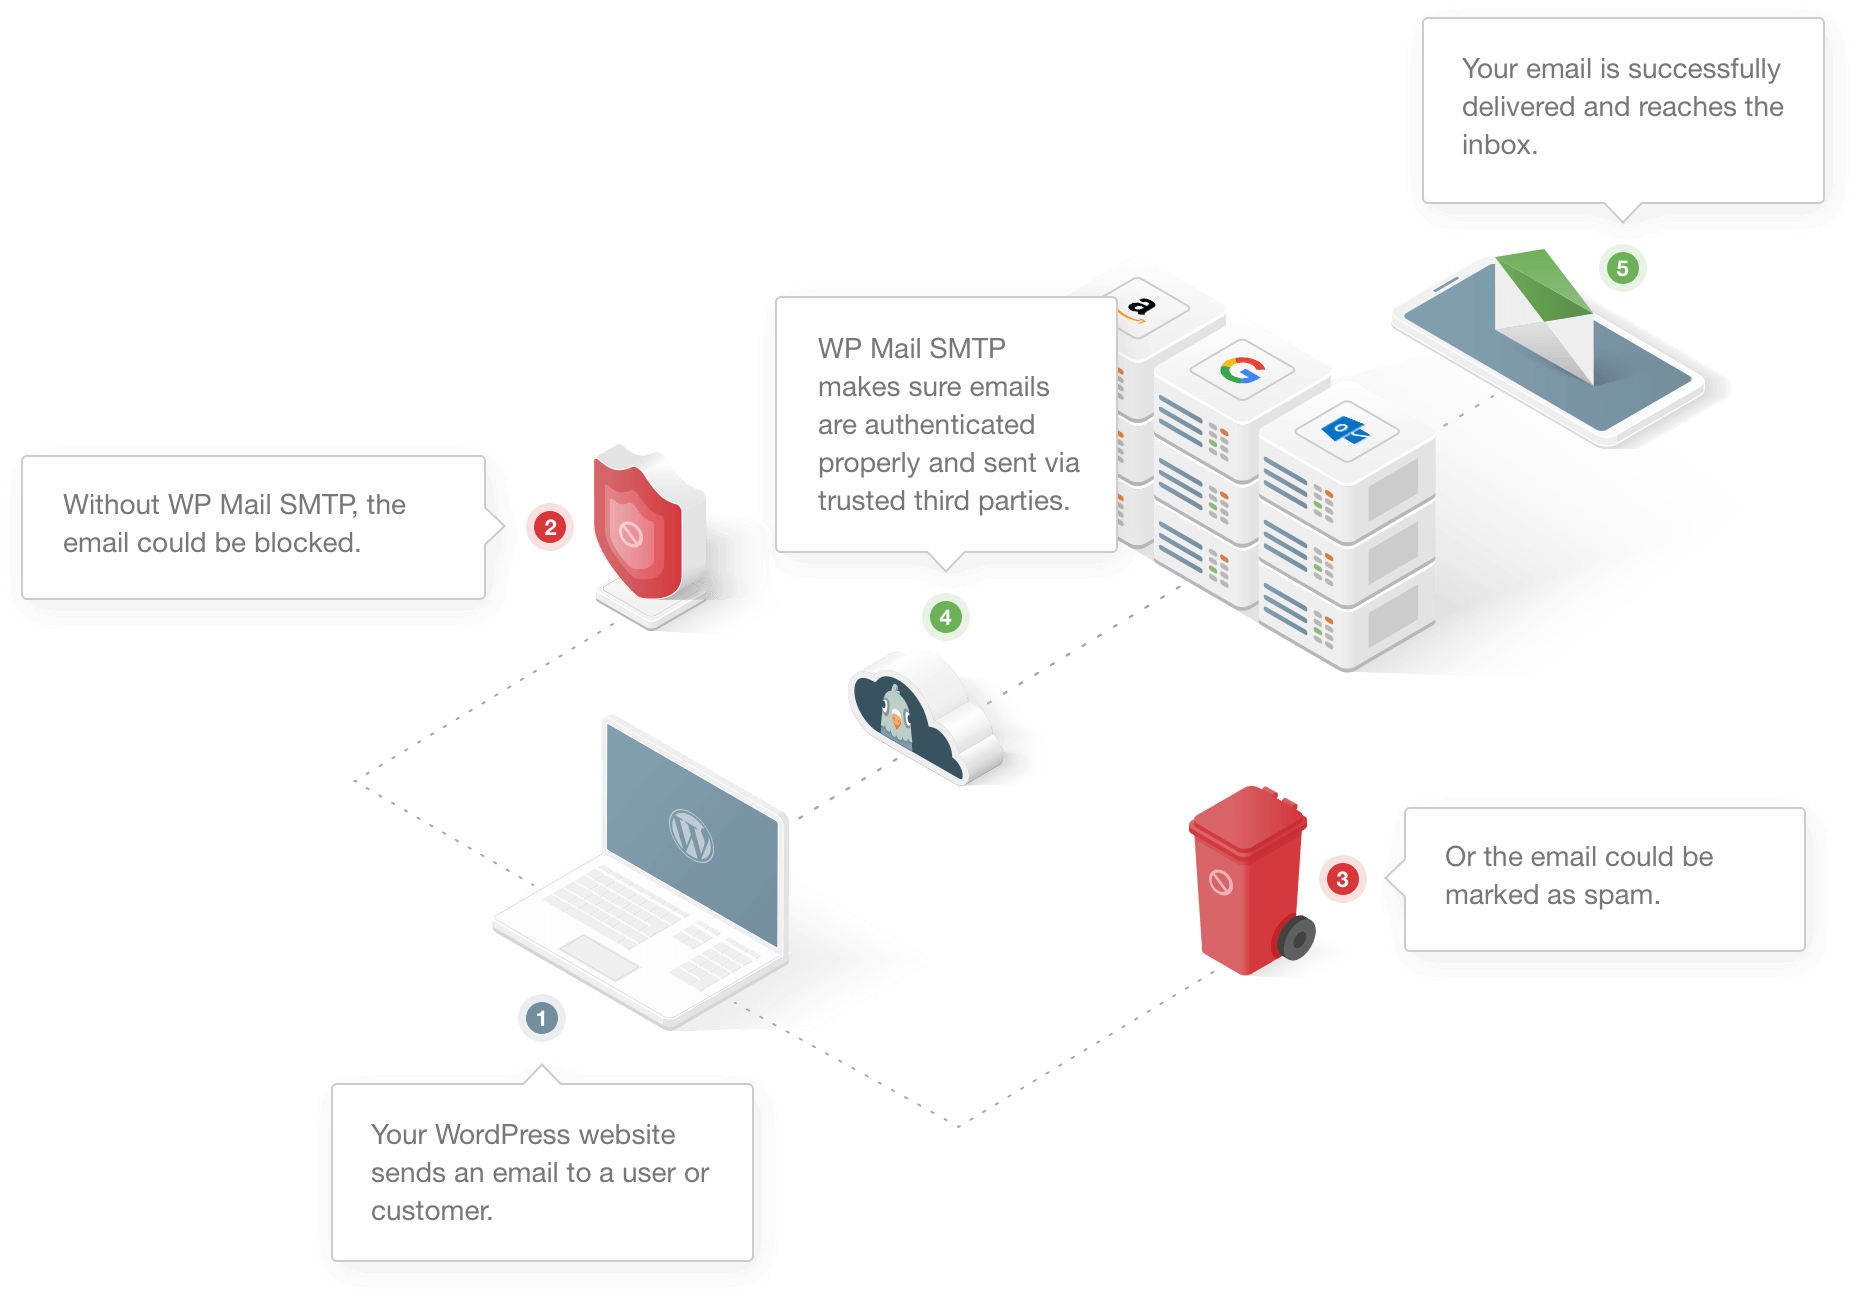 Infographic showing how WP Mail SMTP works